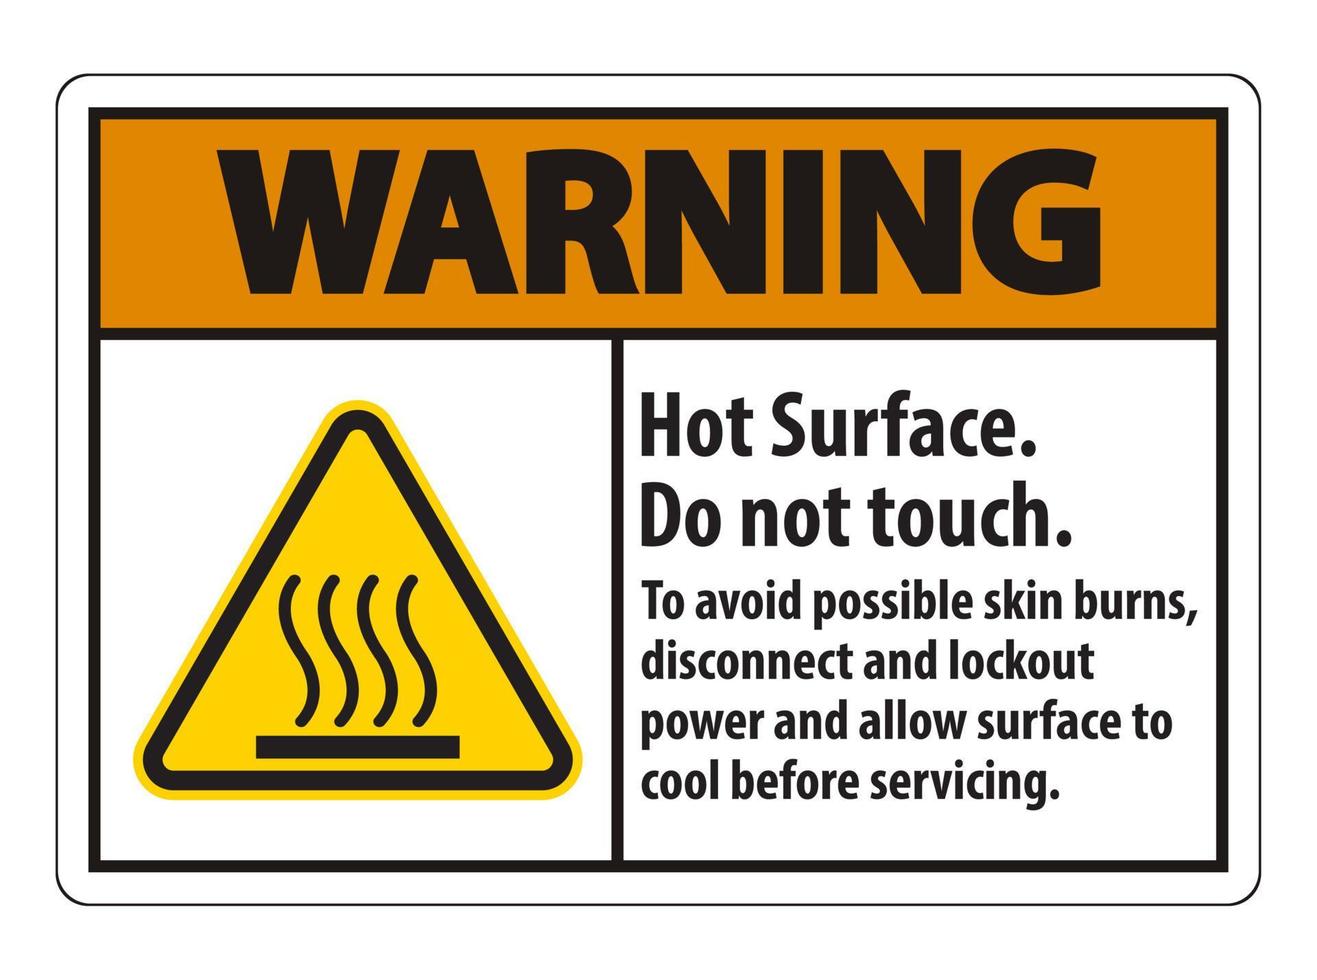 Hot Surface, Do Not Touch, To Avoid Possible Skin Burns, Disconnect And Lockout Power And Allow Surface To Cool Before Servicing Symbol Sign Isolate On White Background,Vector Illustration vector